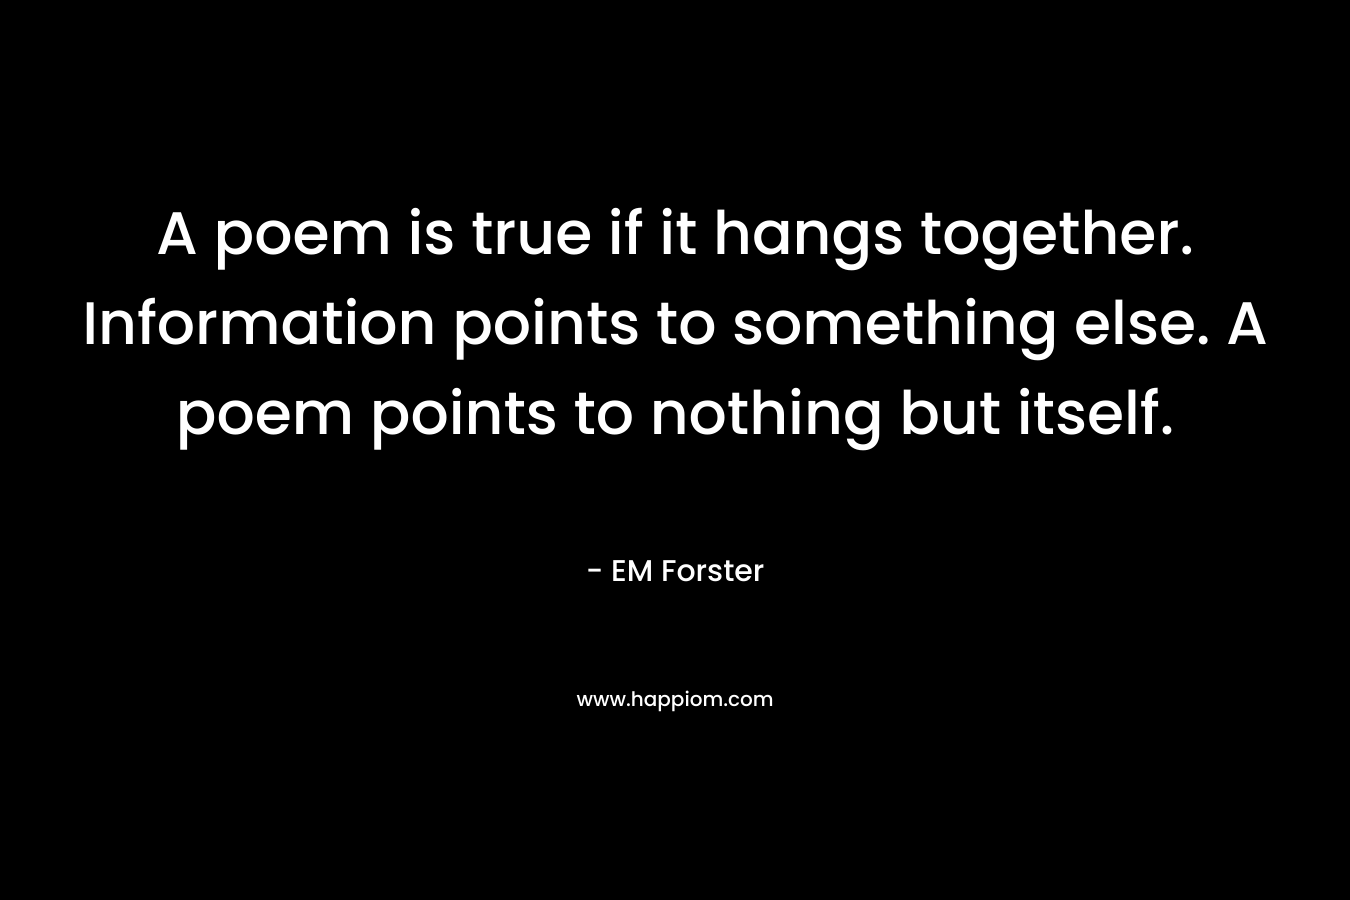 A poem is true if it hangs together. Information points to something else. A poem points to nothing but itself. 